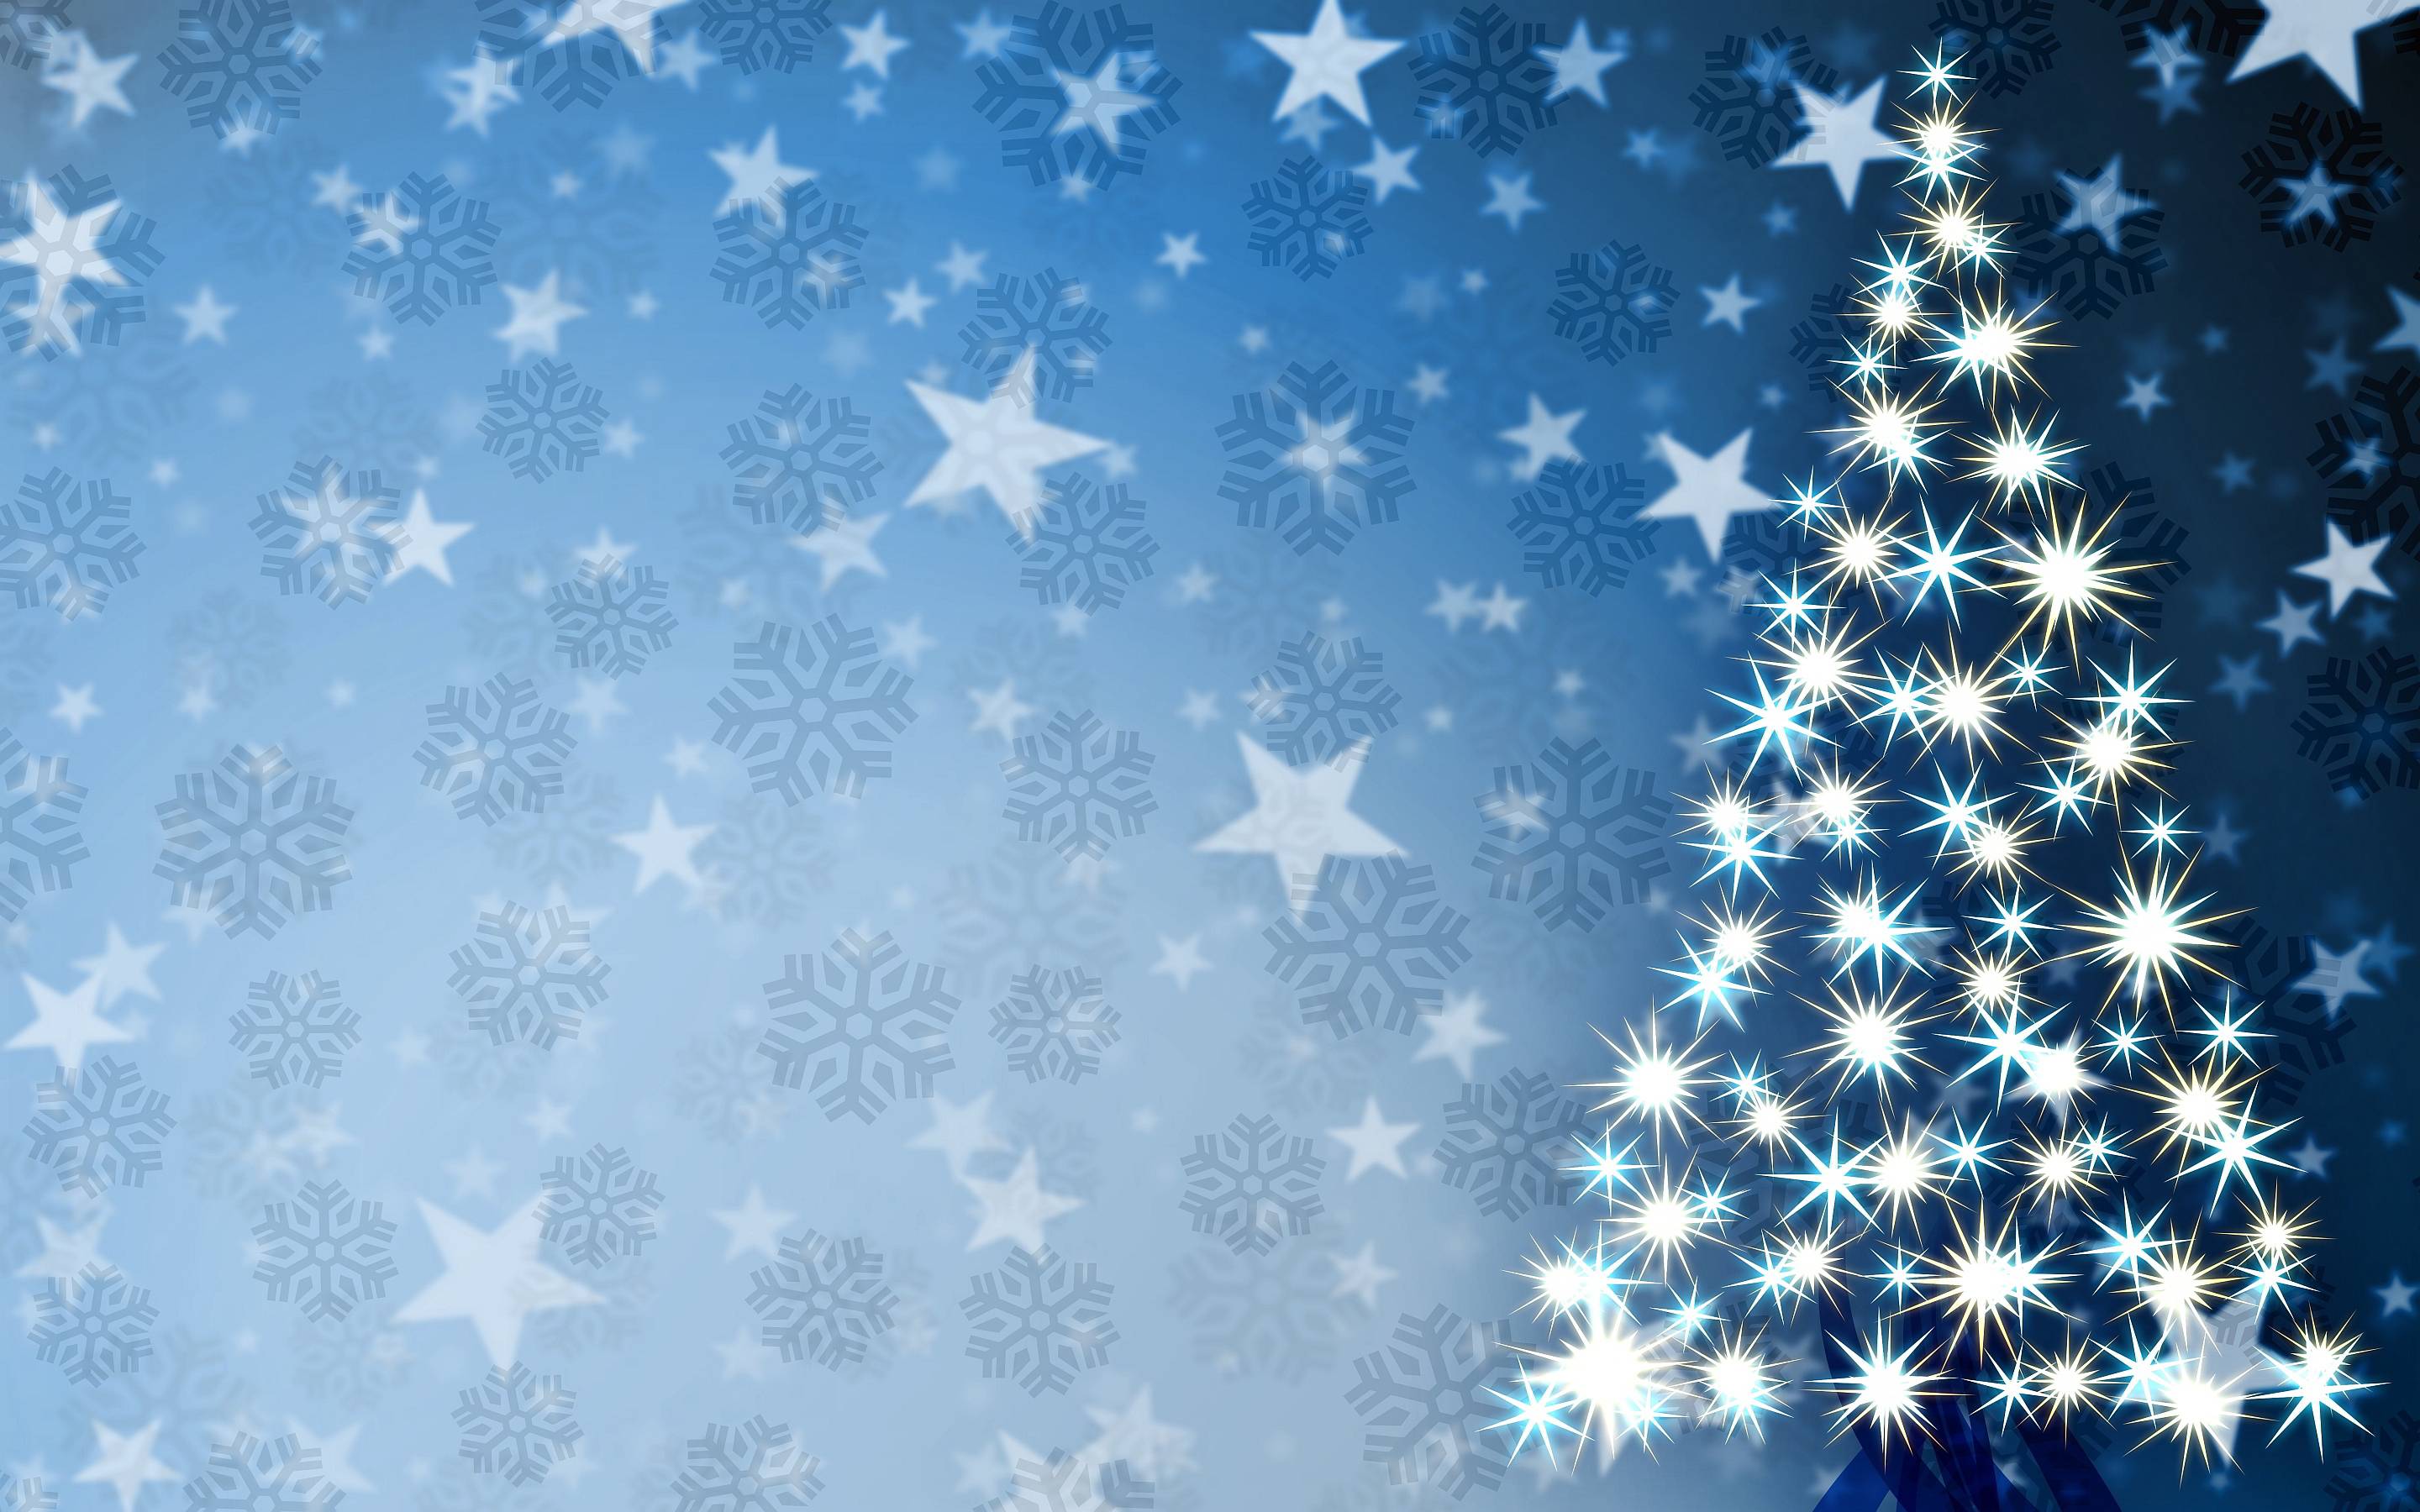 Stars in the form of a Christmas tree on snowflakes background